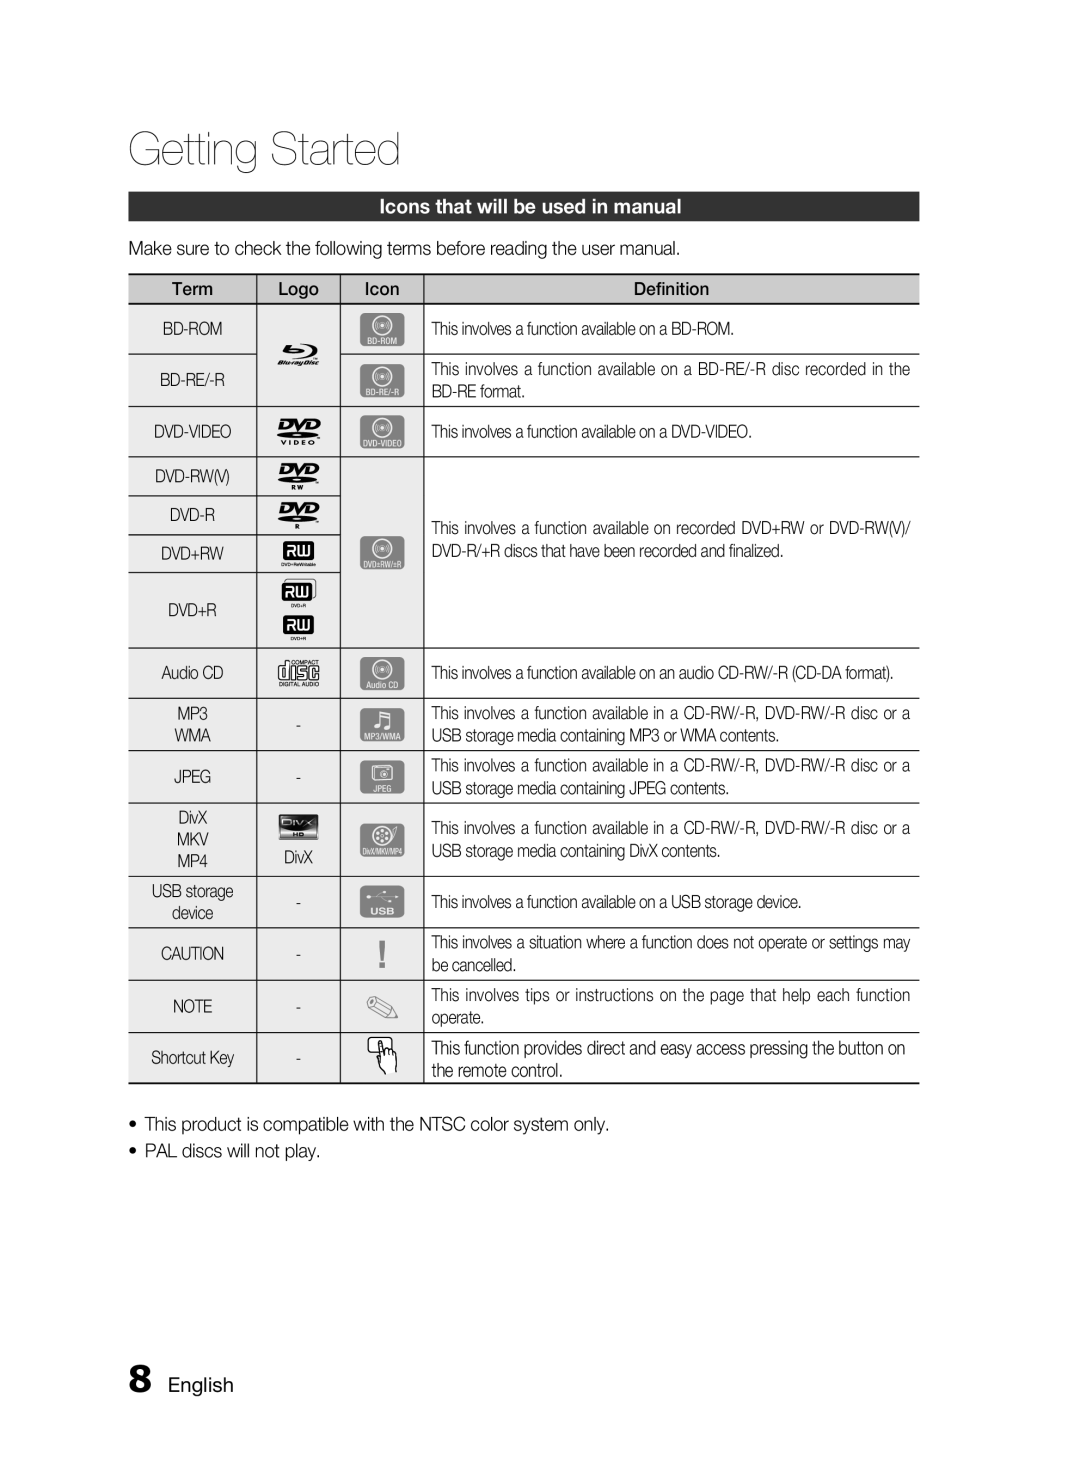 Samsung AH68-02255S, HT-C6530 user manual Icons that will be used in manual, English, Getting Started 